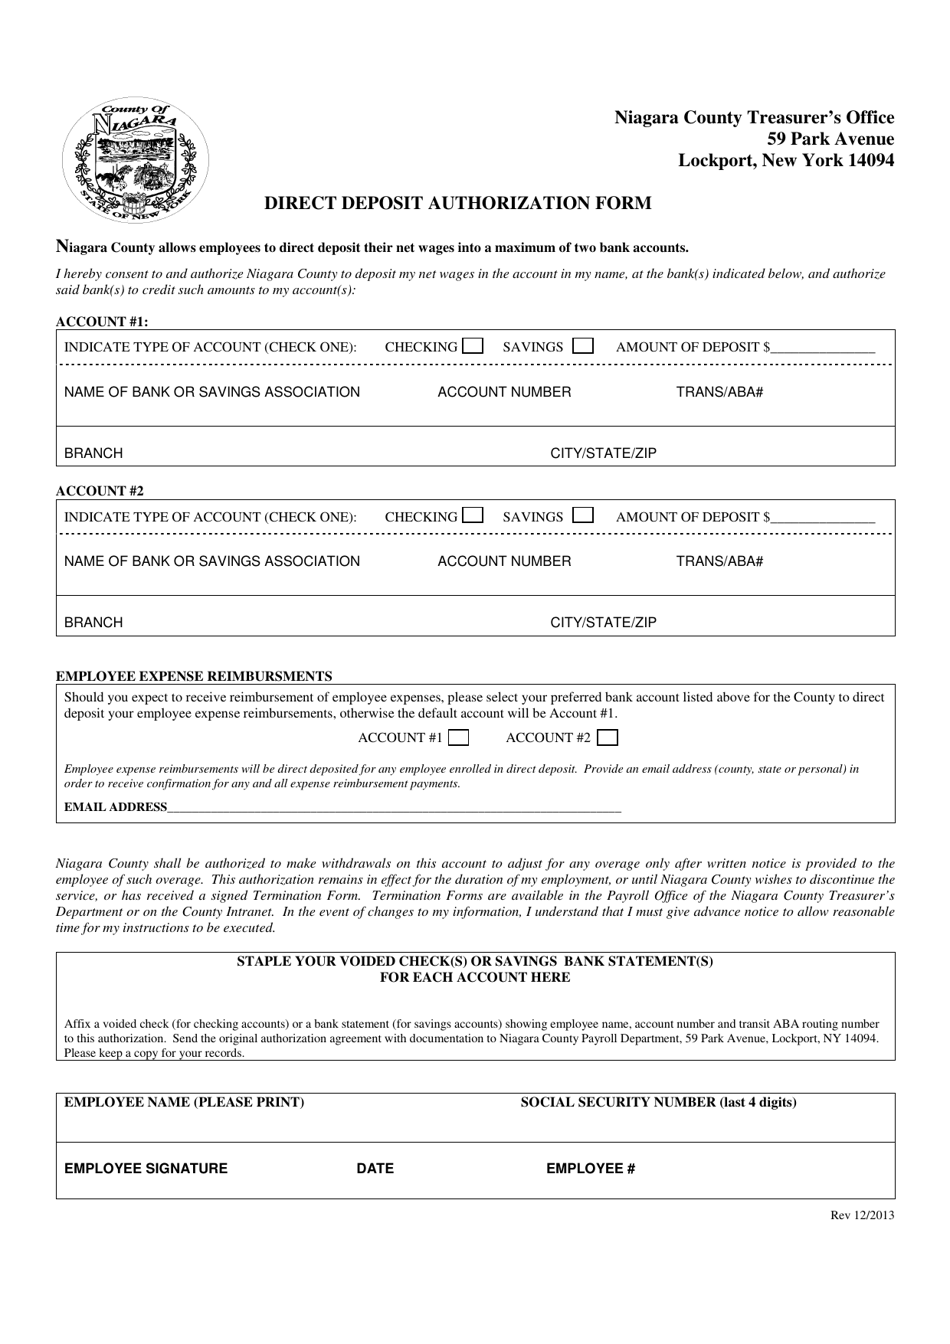 Direct Deposit Authorization Form - Niagara County, New York, Page 1